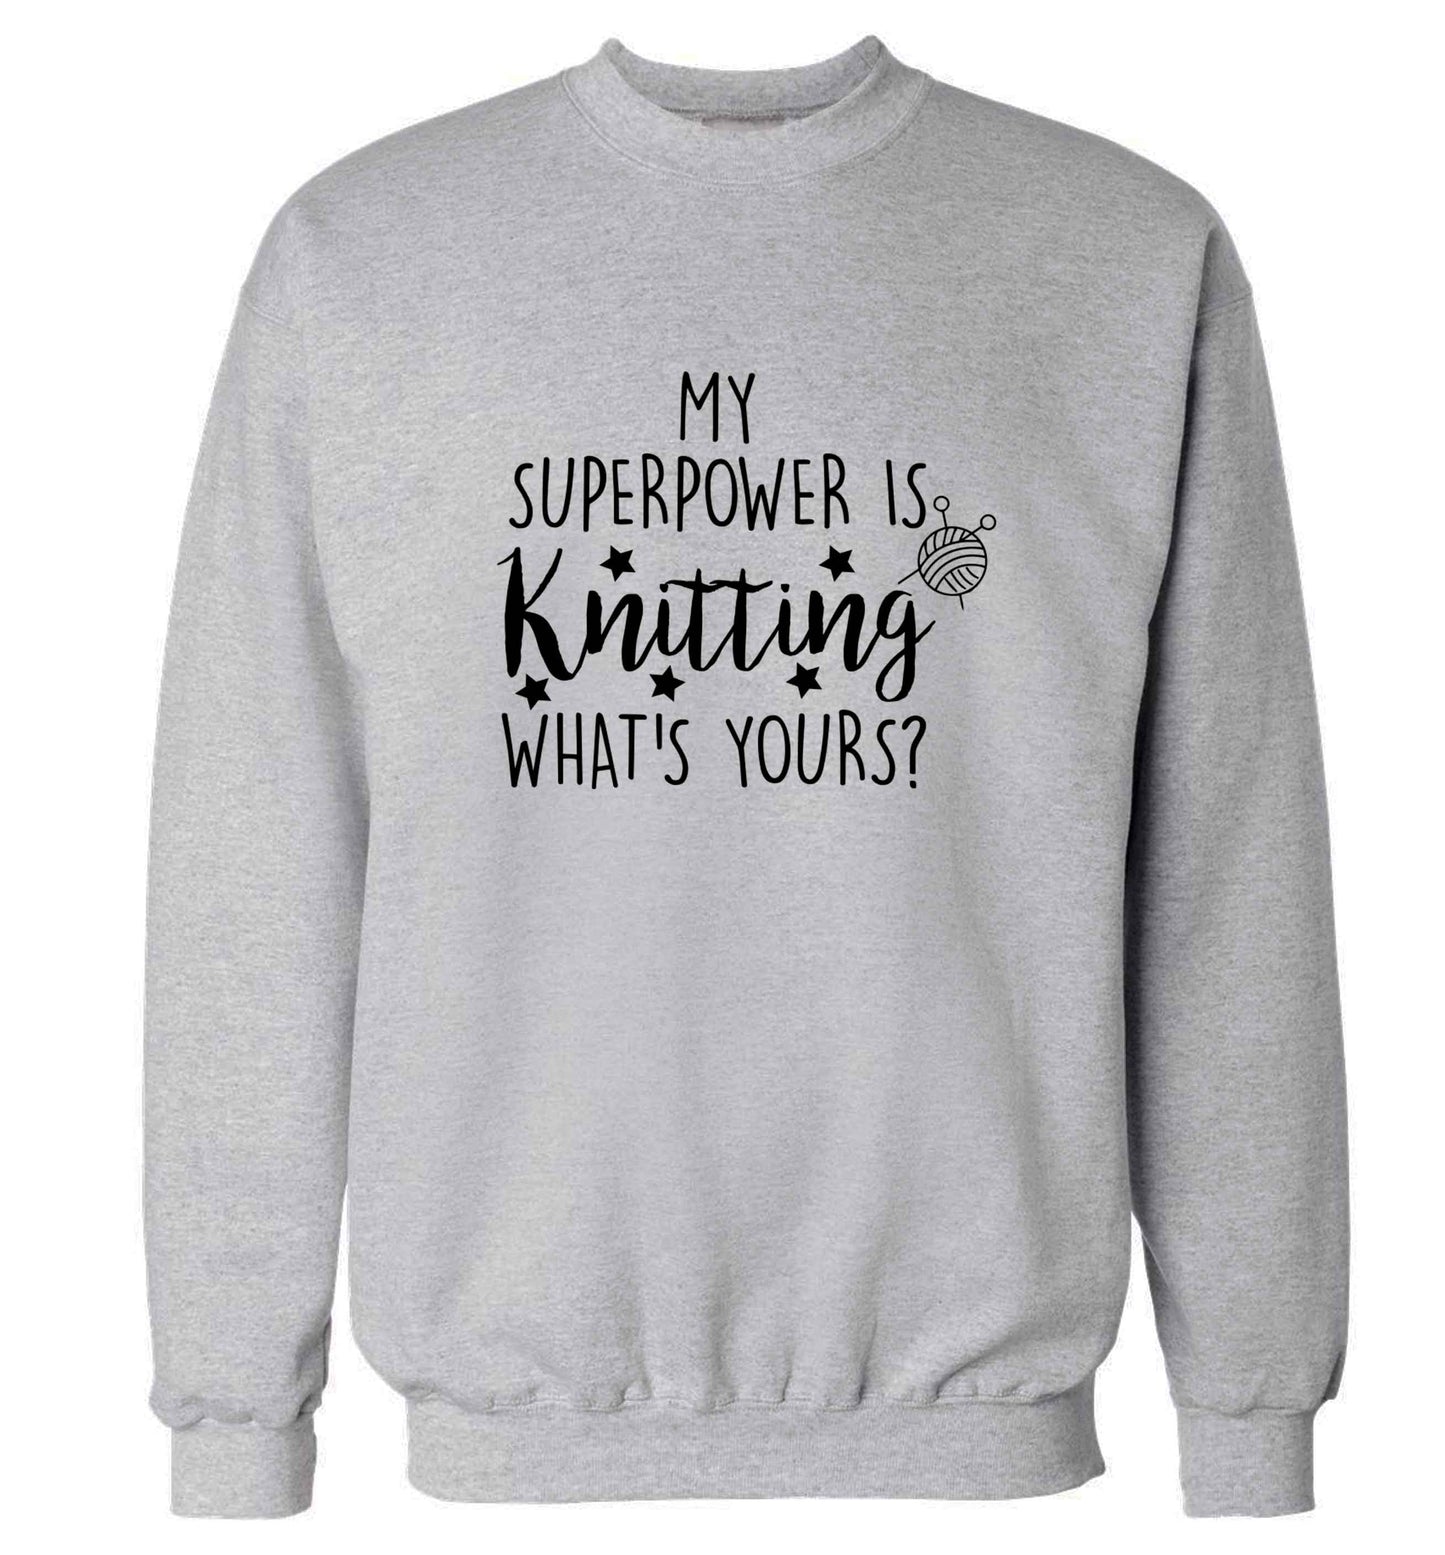 Merry Christmas adult's unisex grey sweater 2XL